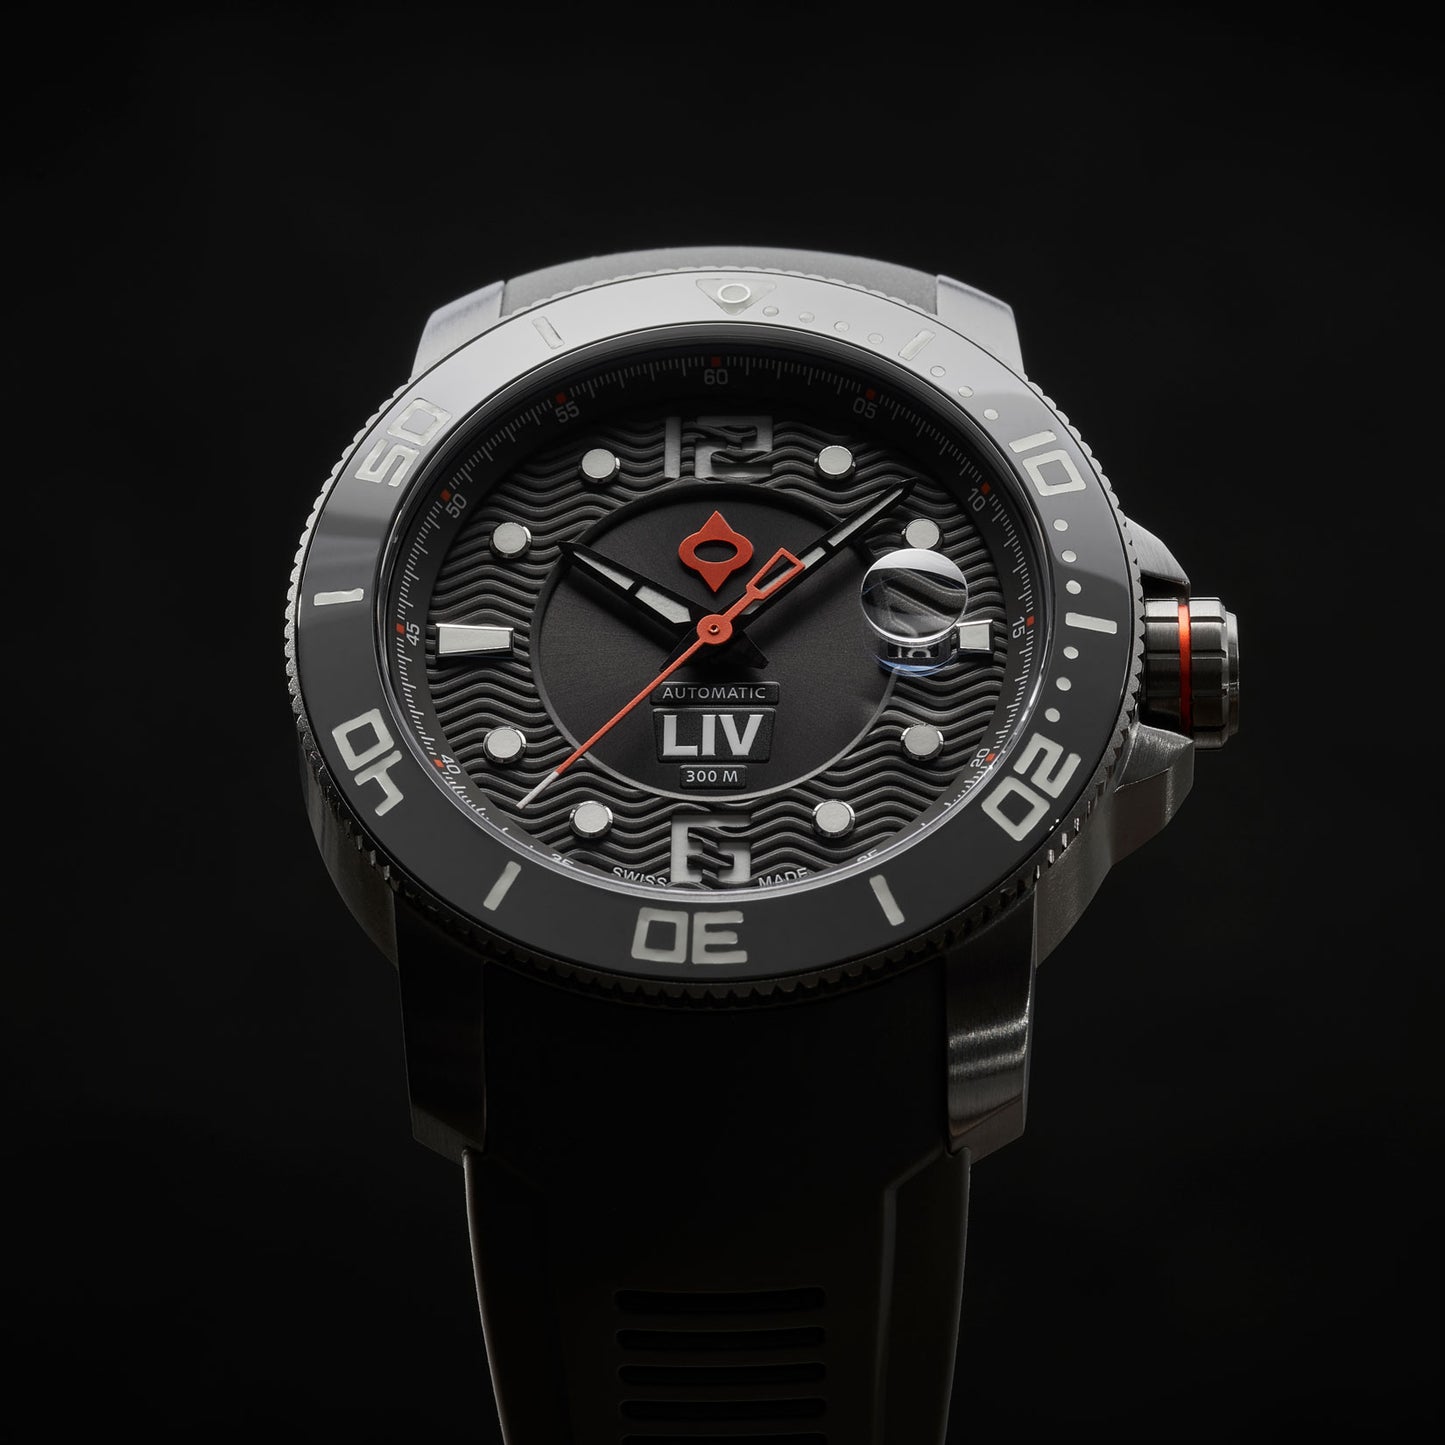 GX Diver's 44mm Crater Gray